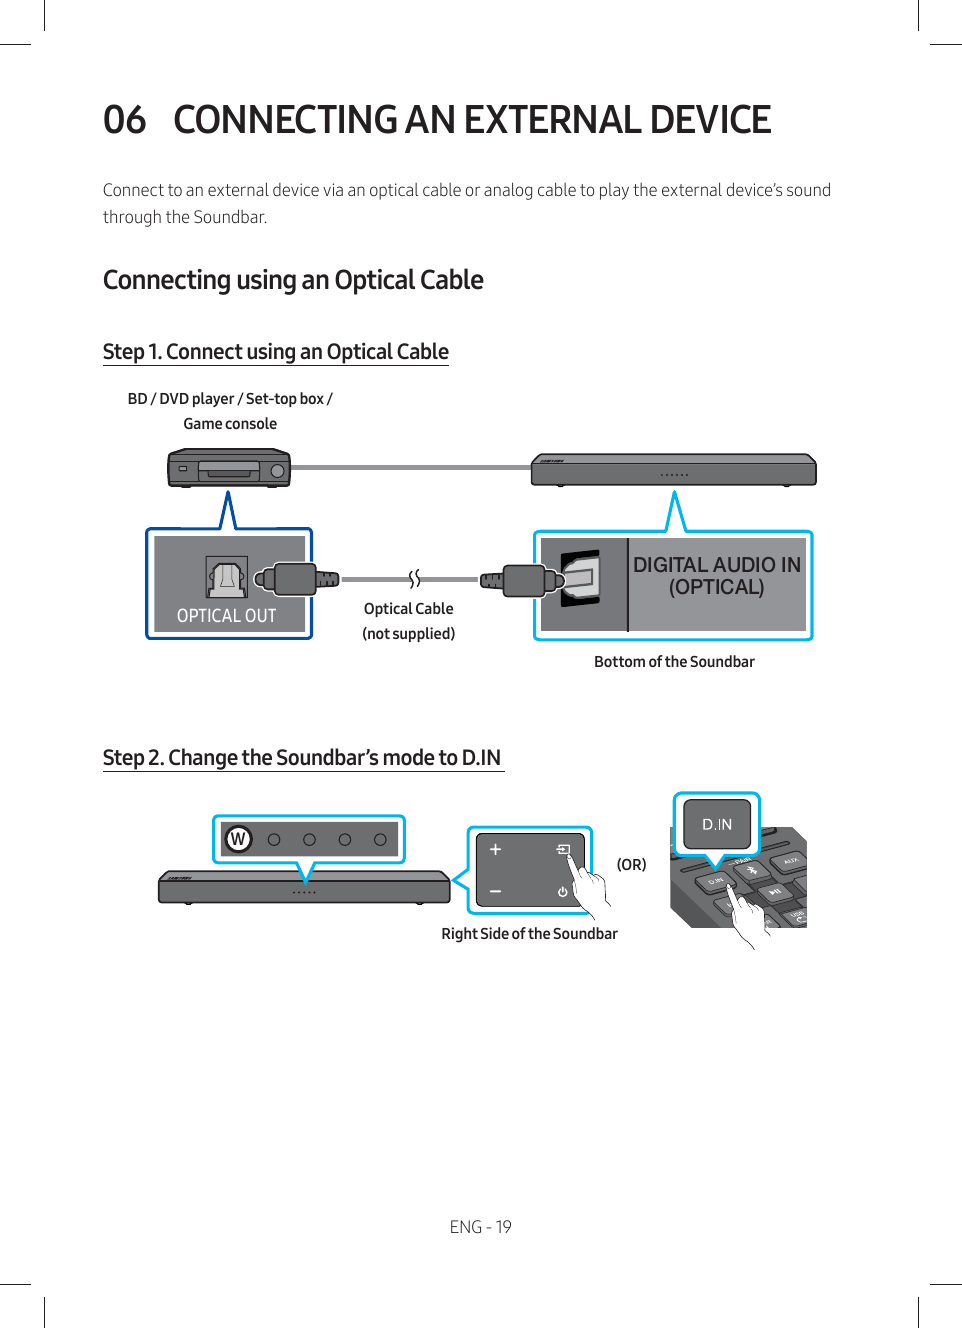 ENG - 1906  CONNECTING AN EXTERNAL DEVICEConnect to an external device via an optical cable or analog cable to play the external device’s sound through the Soundbar. Connecting using an Optical Cable Step 1. Connect using an Optical CableDIGITAL AUDIO IN(OPTICAL)ĮťƟÃAøĮƸƟBottom of the SoundbarOptical Cable (not supplied)BD / DVD player / Set-top box /  Game consoleStep 2. Change the Soundbar’s mode to D.IN Right Side of the Soundbar(OR)W